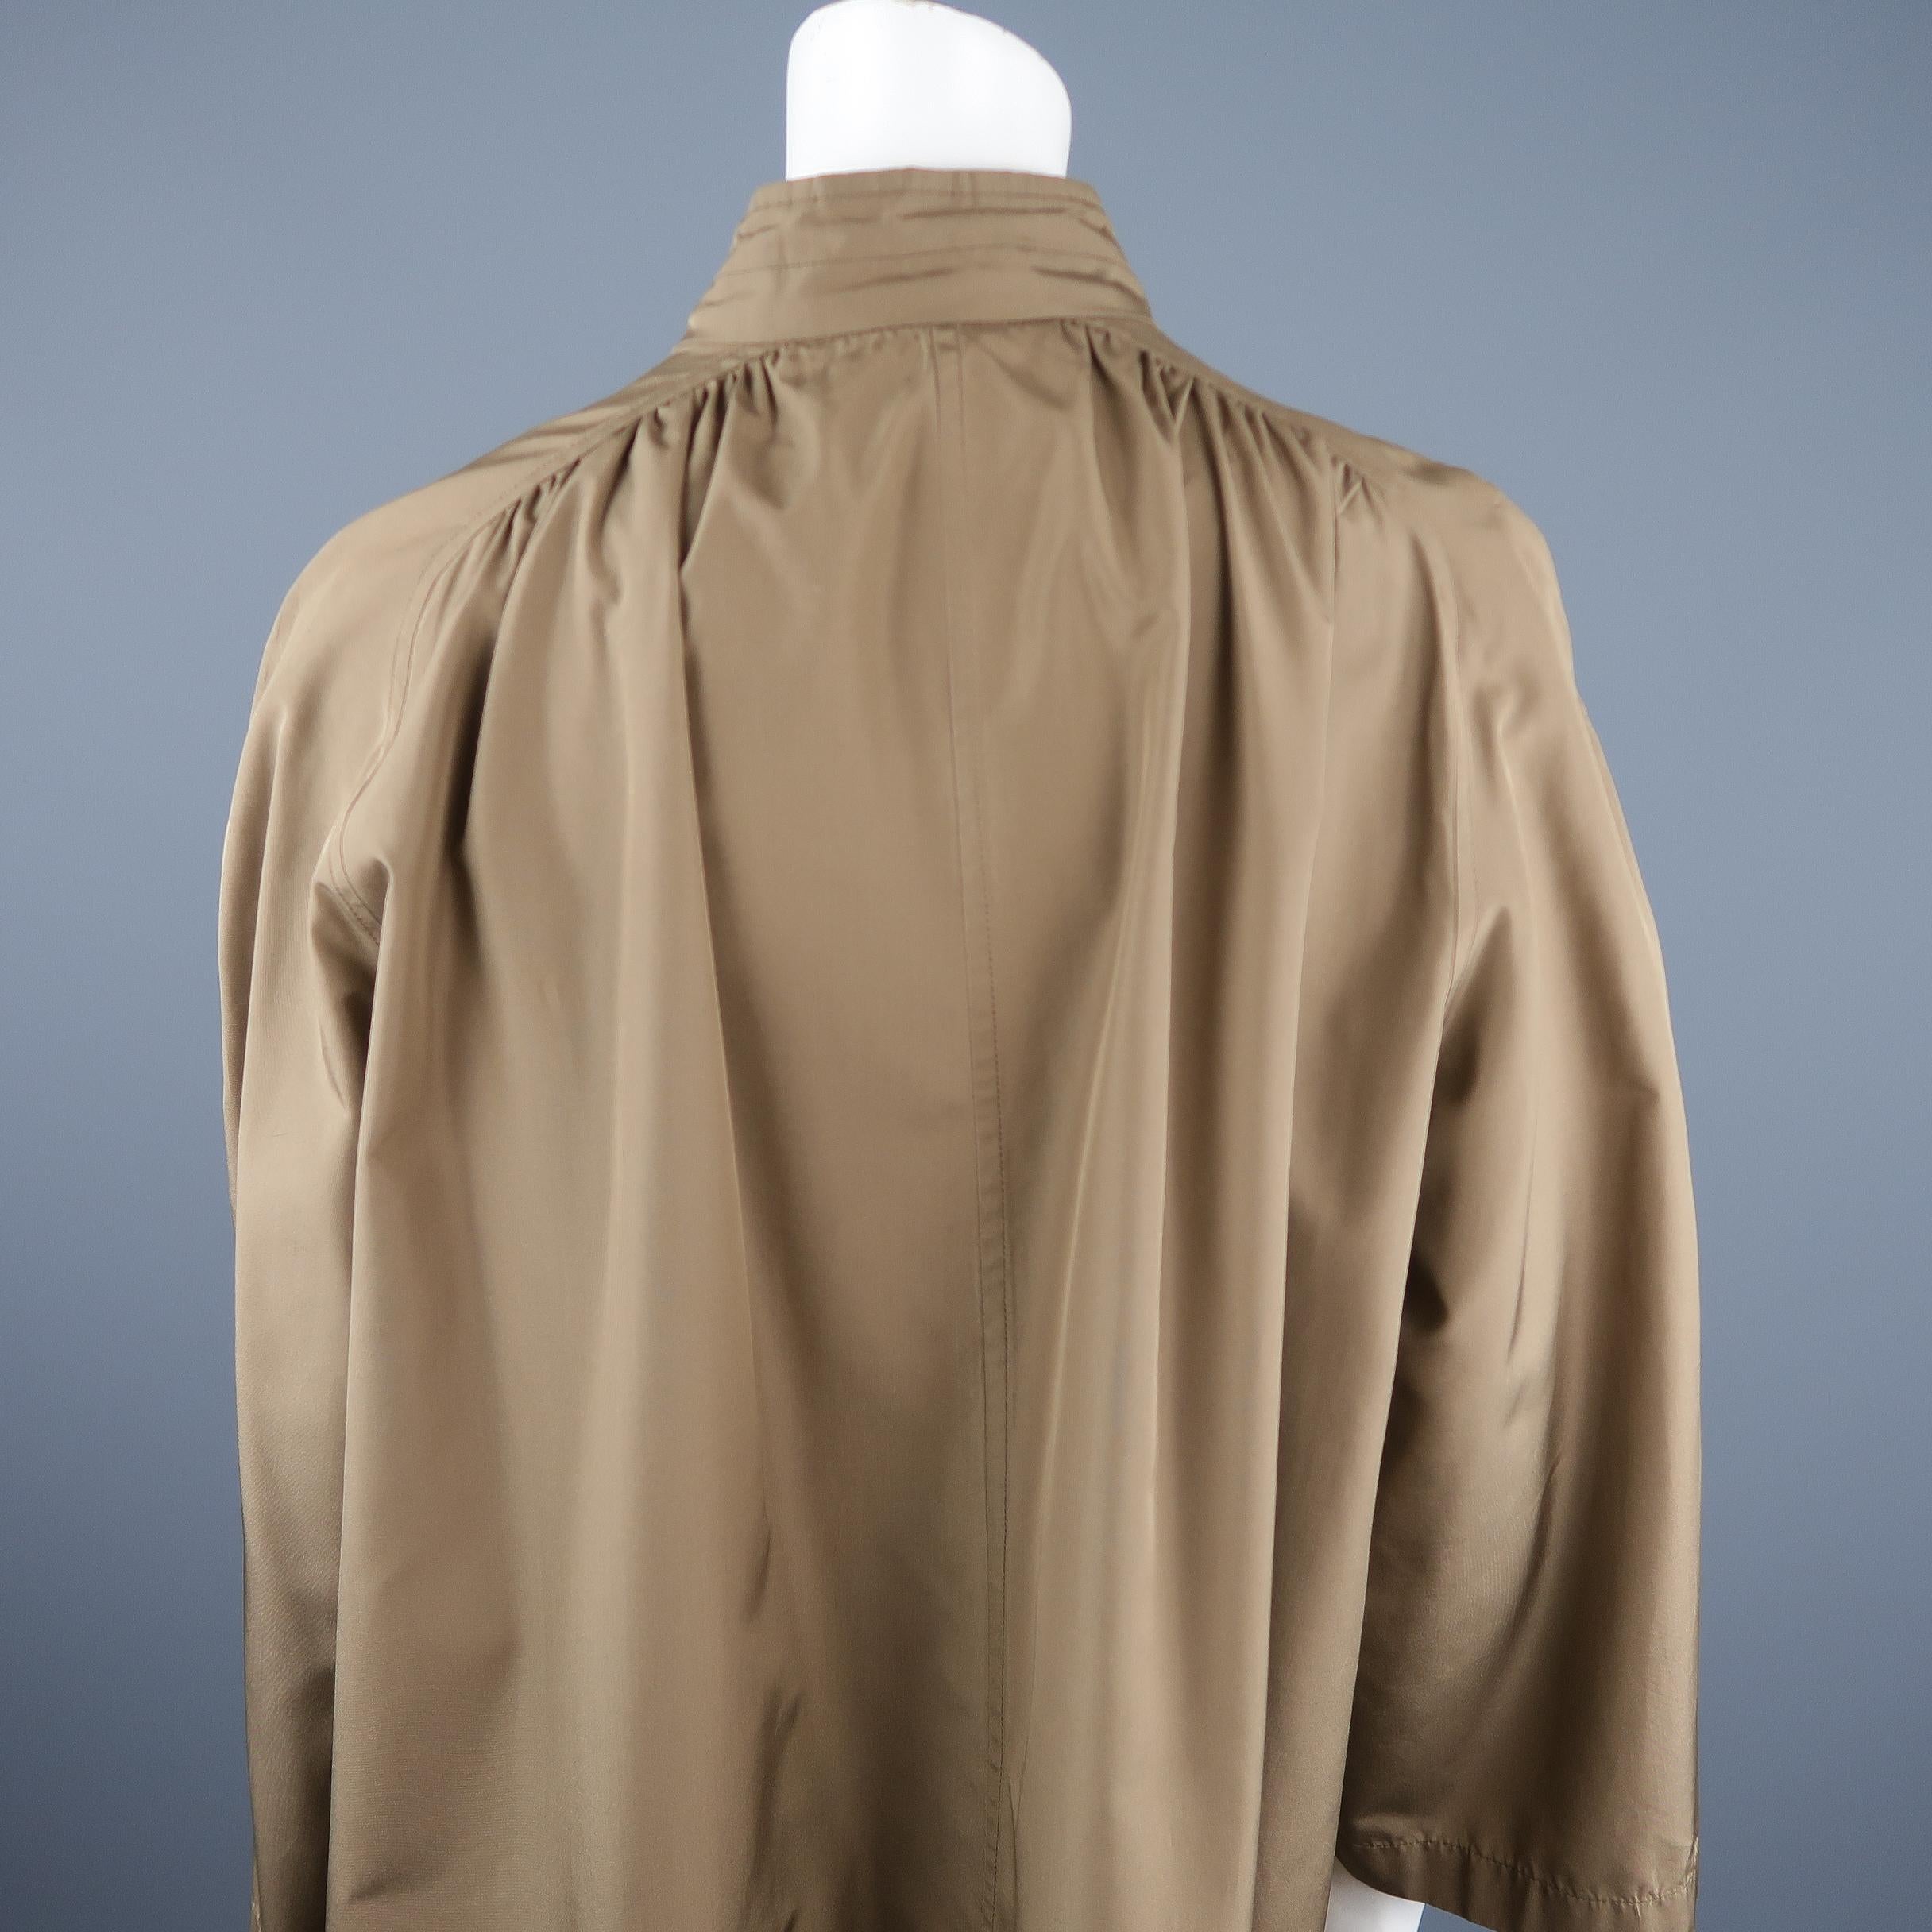 Vintage VALENTINO Tan High Collar Gathered A Line Over Coat 2